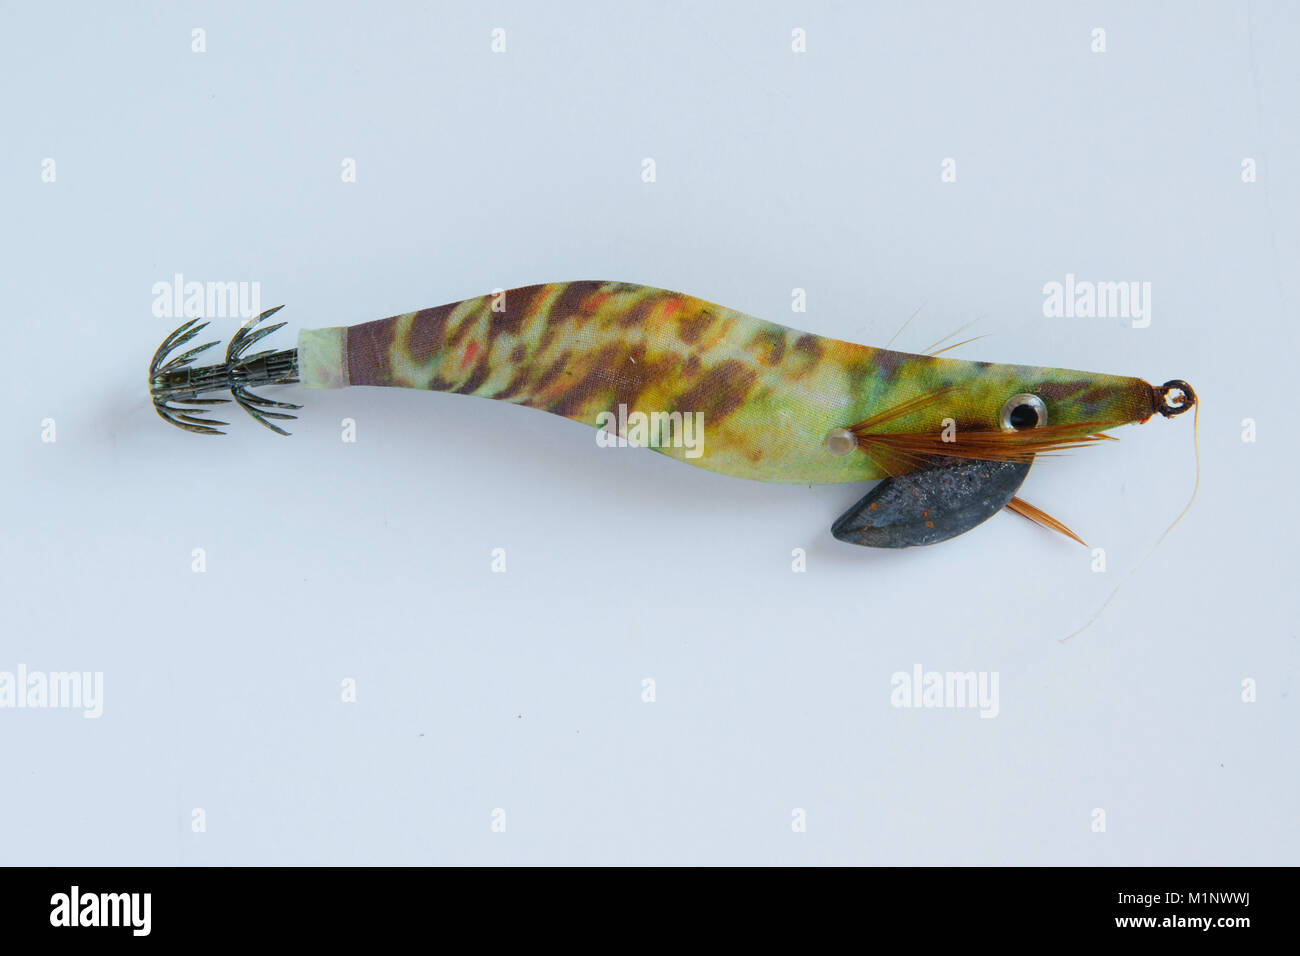 A Snakehead Fish Is Caught With A Fake Bait Stock Photo - Download